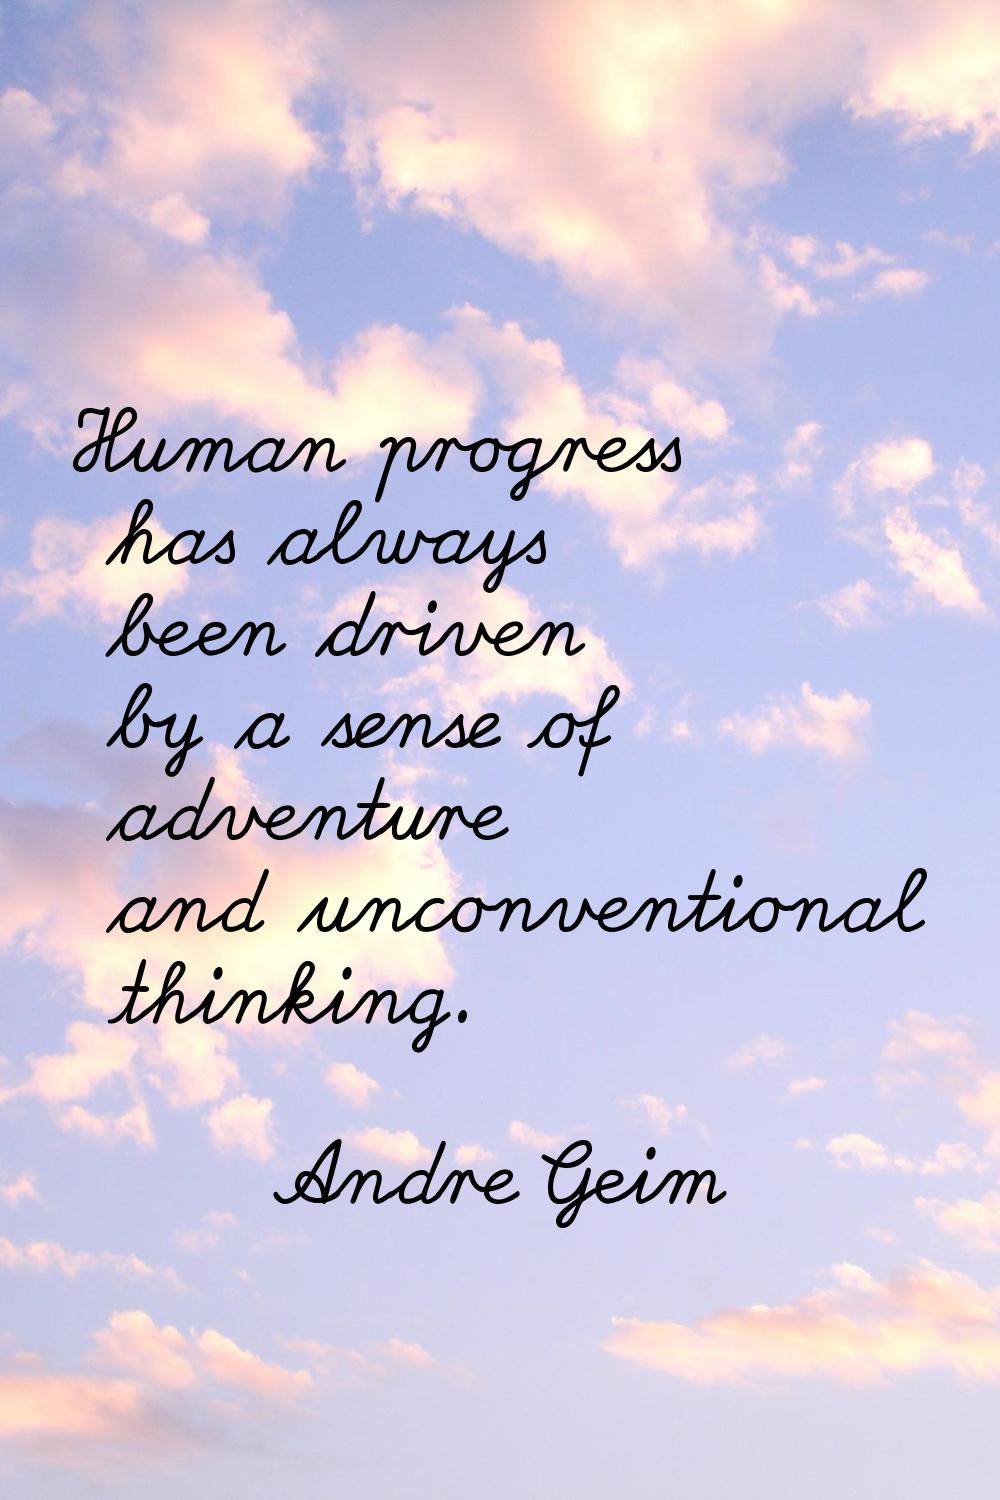 Human progress has always been driven by a sense of adventure and unconventional thinking.